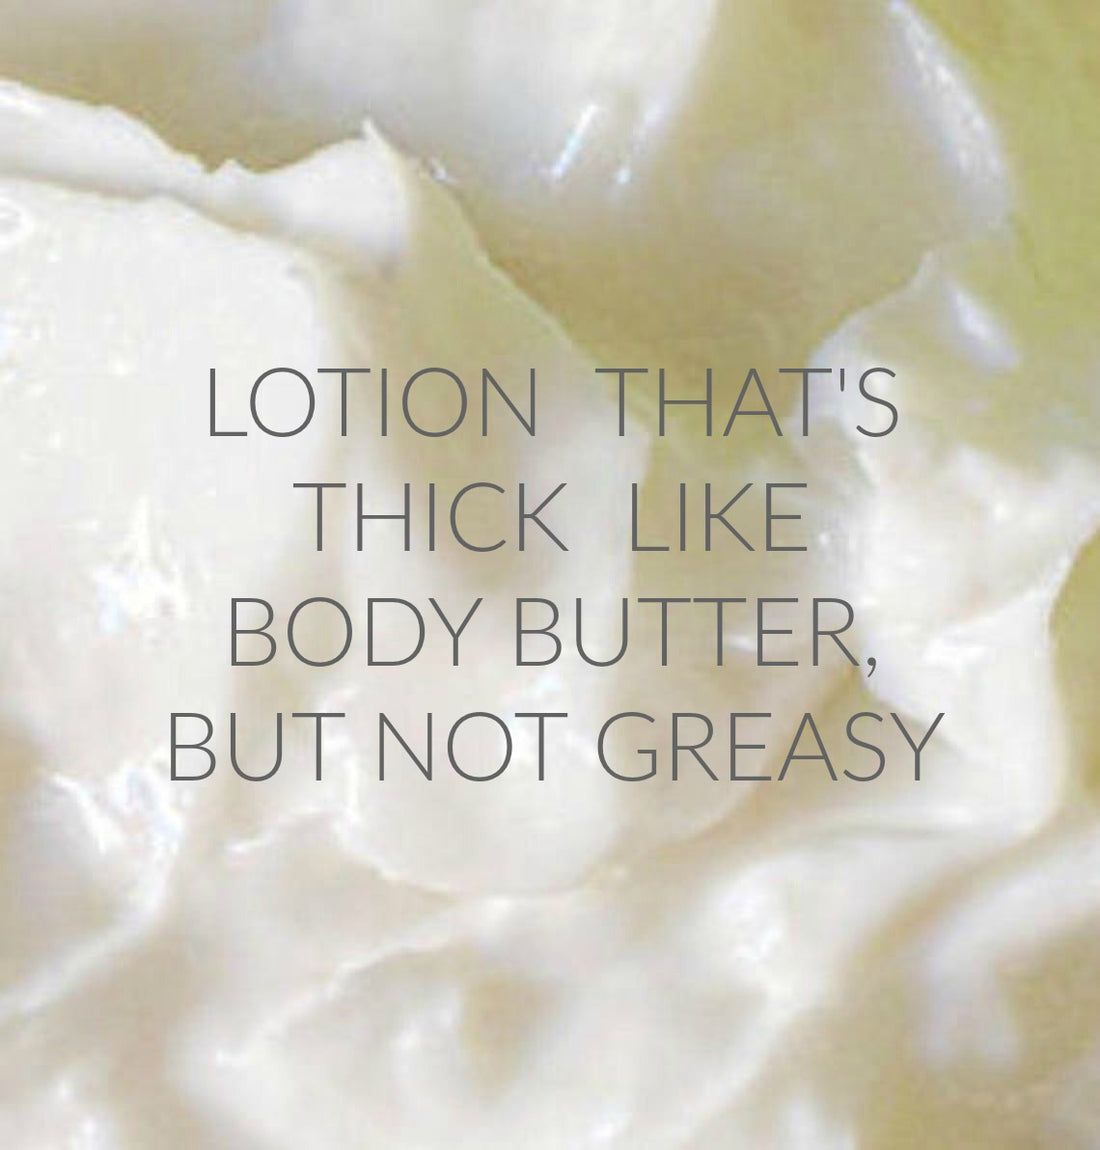 EMBER  scented water free, vegan non-greasy Body Butter Lotion